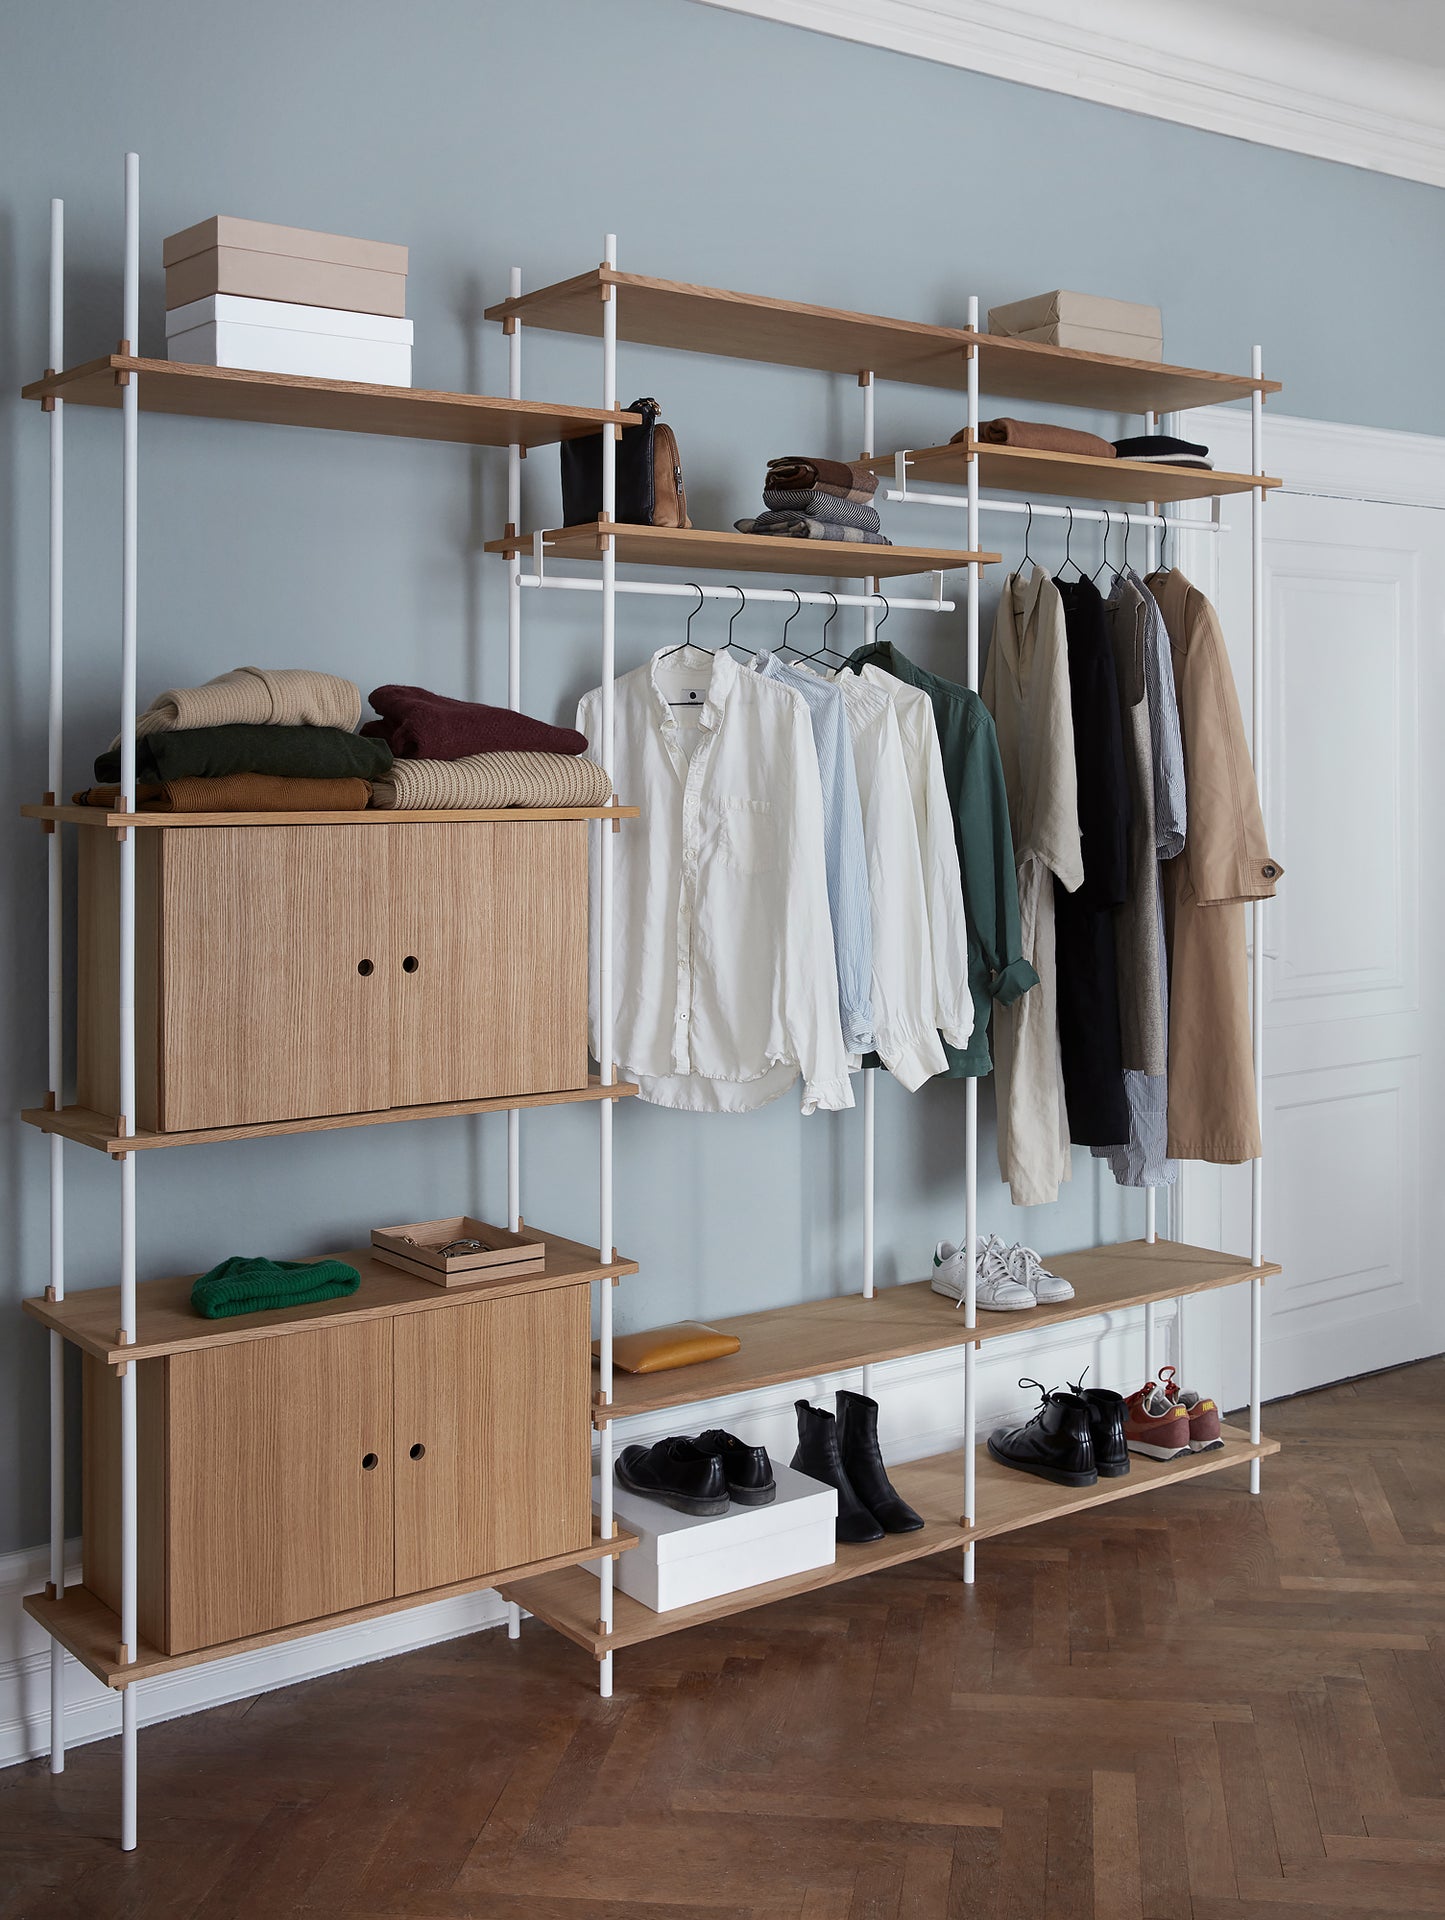 Moebe Shelving System 200 cm - White uprights with Oiled Oak Components